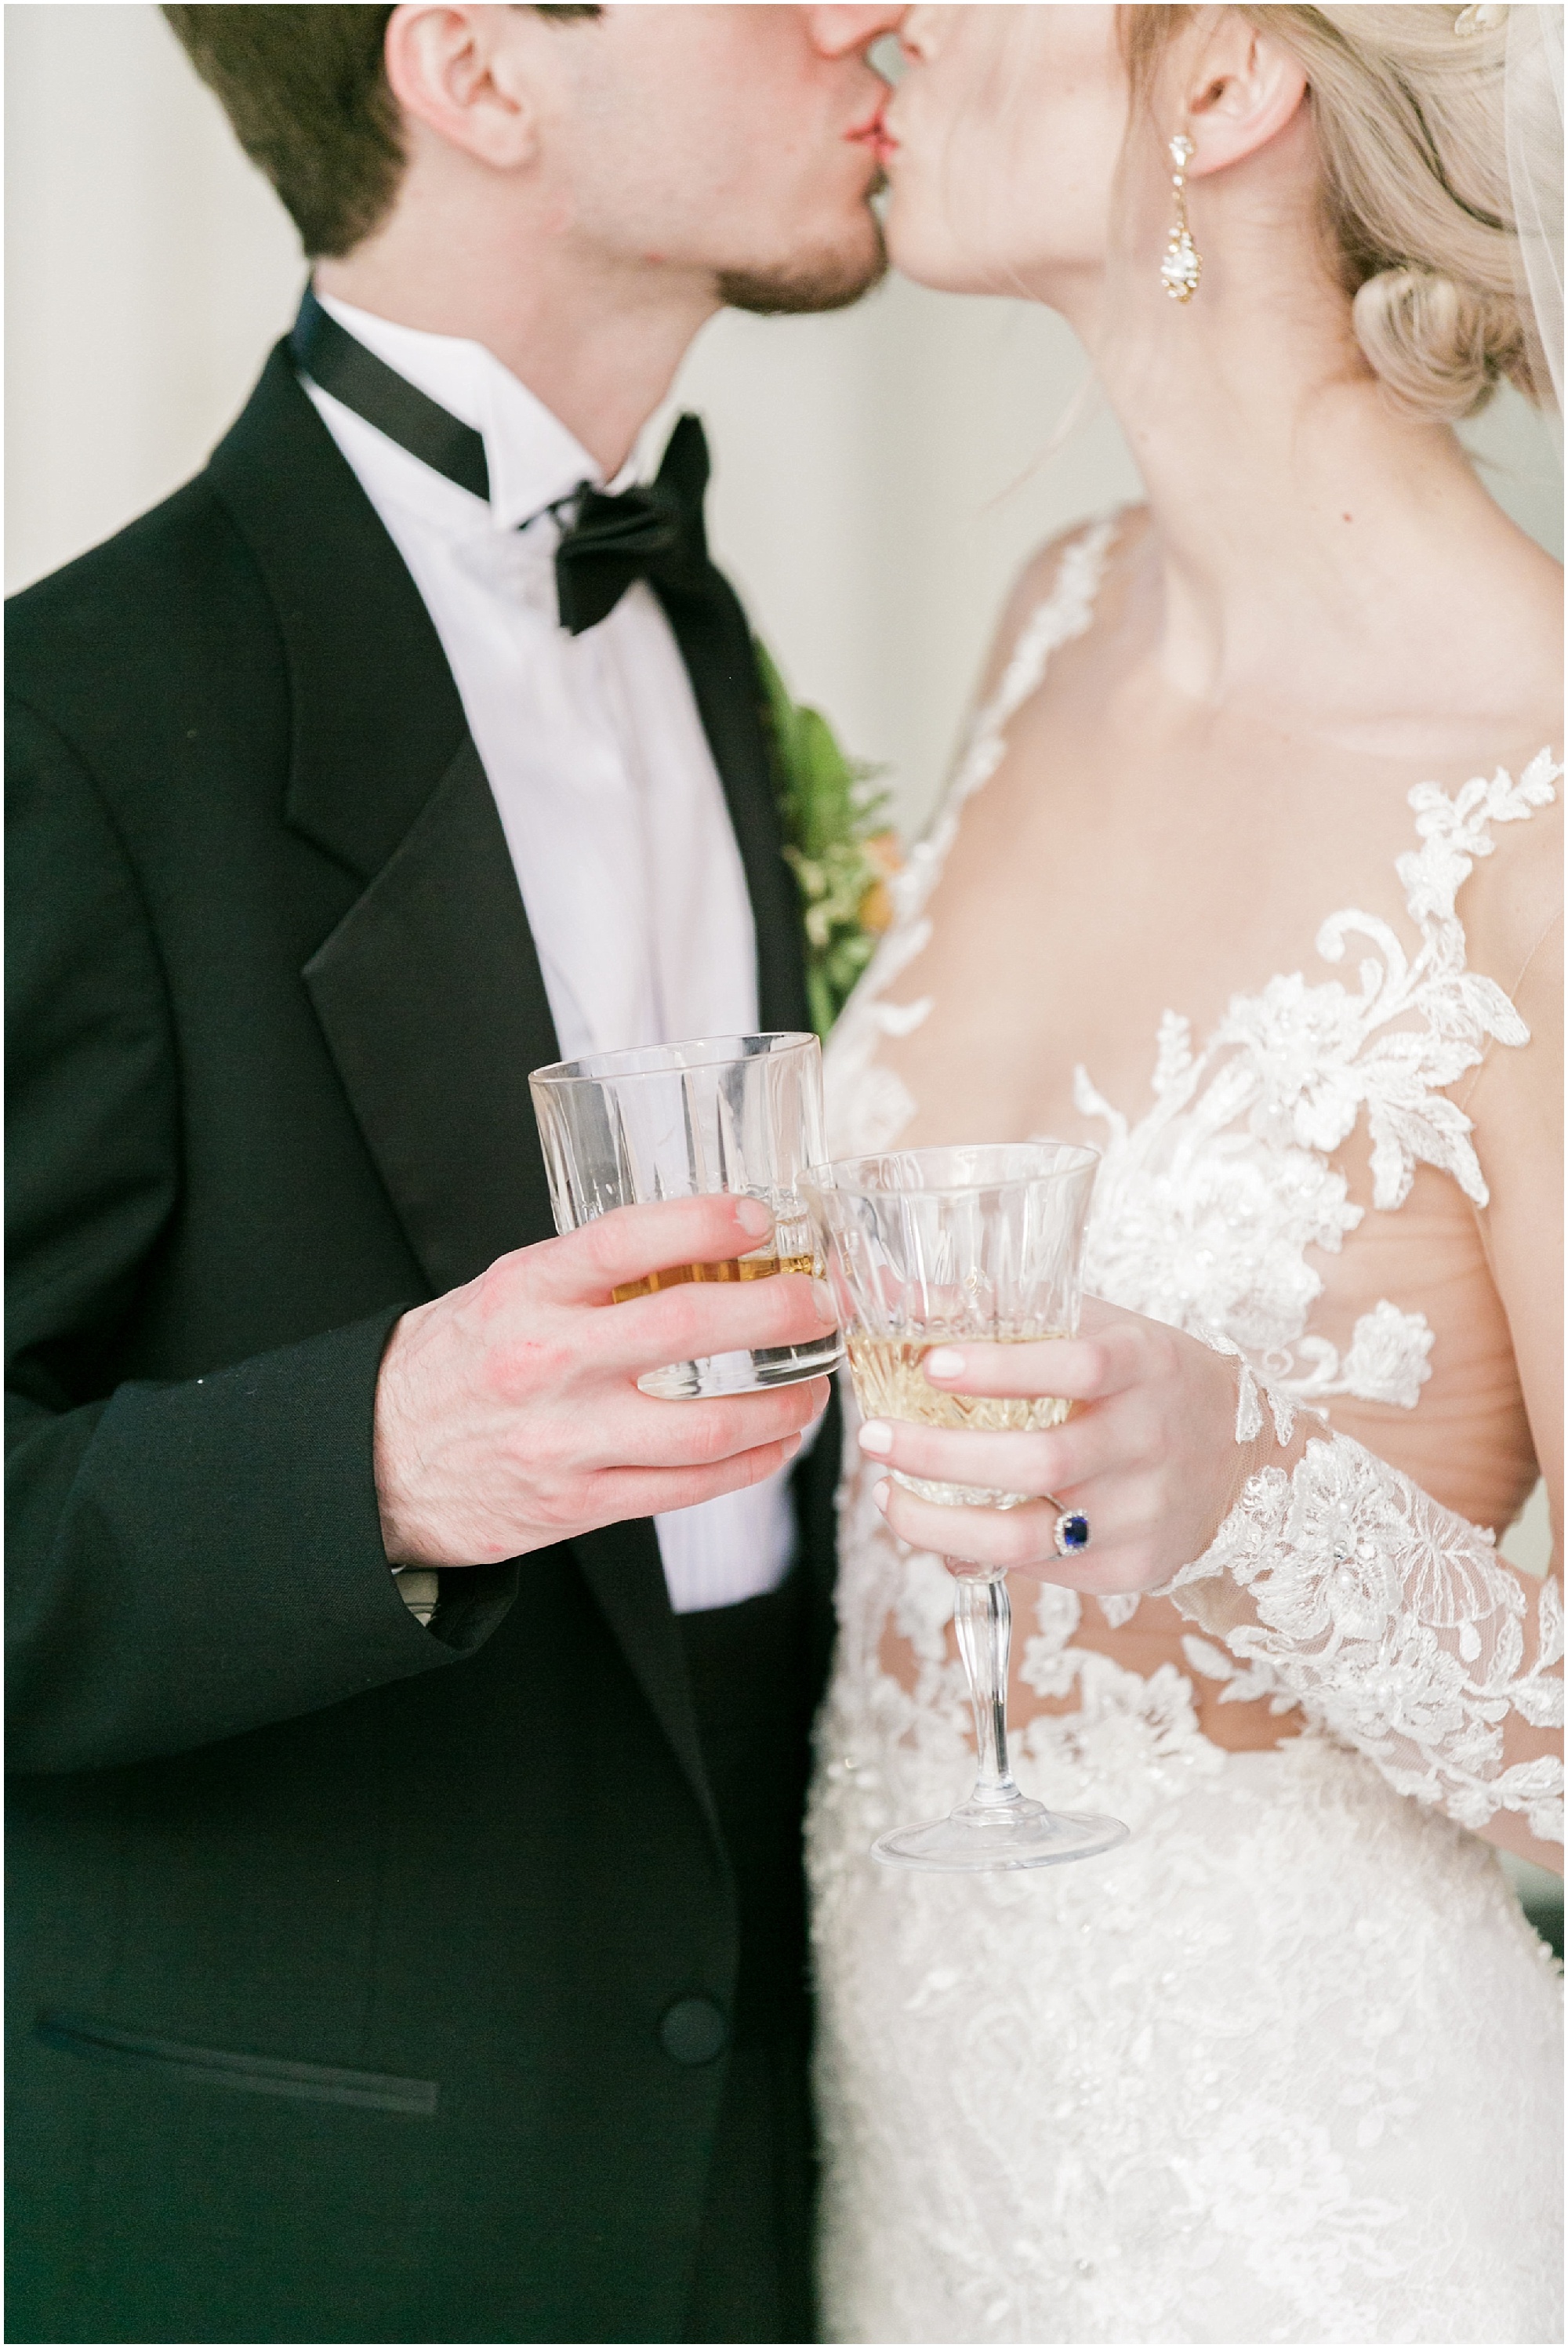 Timeless Southern Wedding bride and groom kiss while toasting.